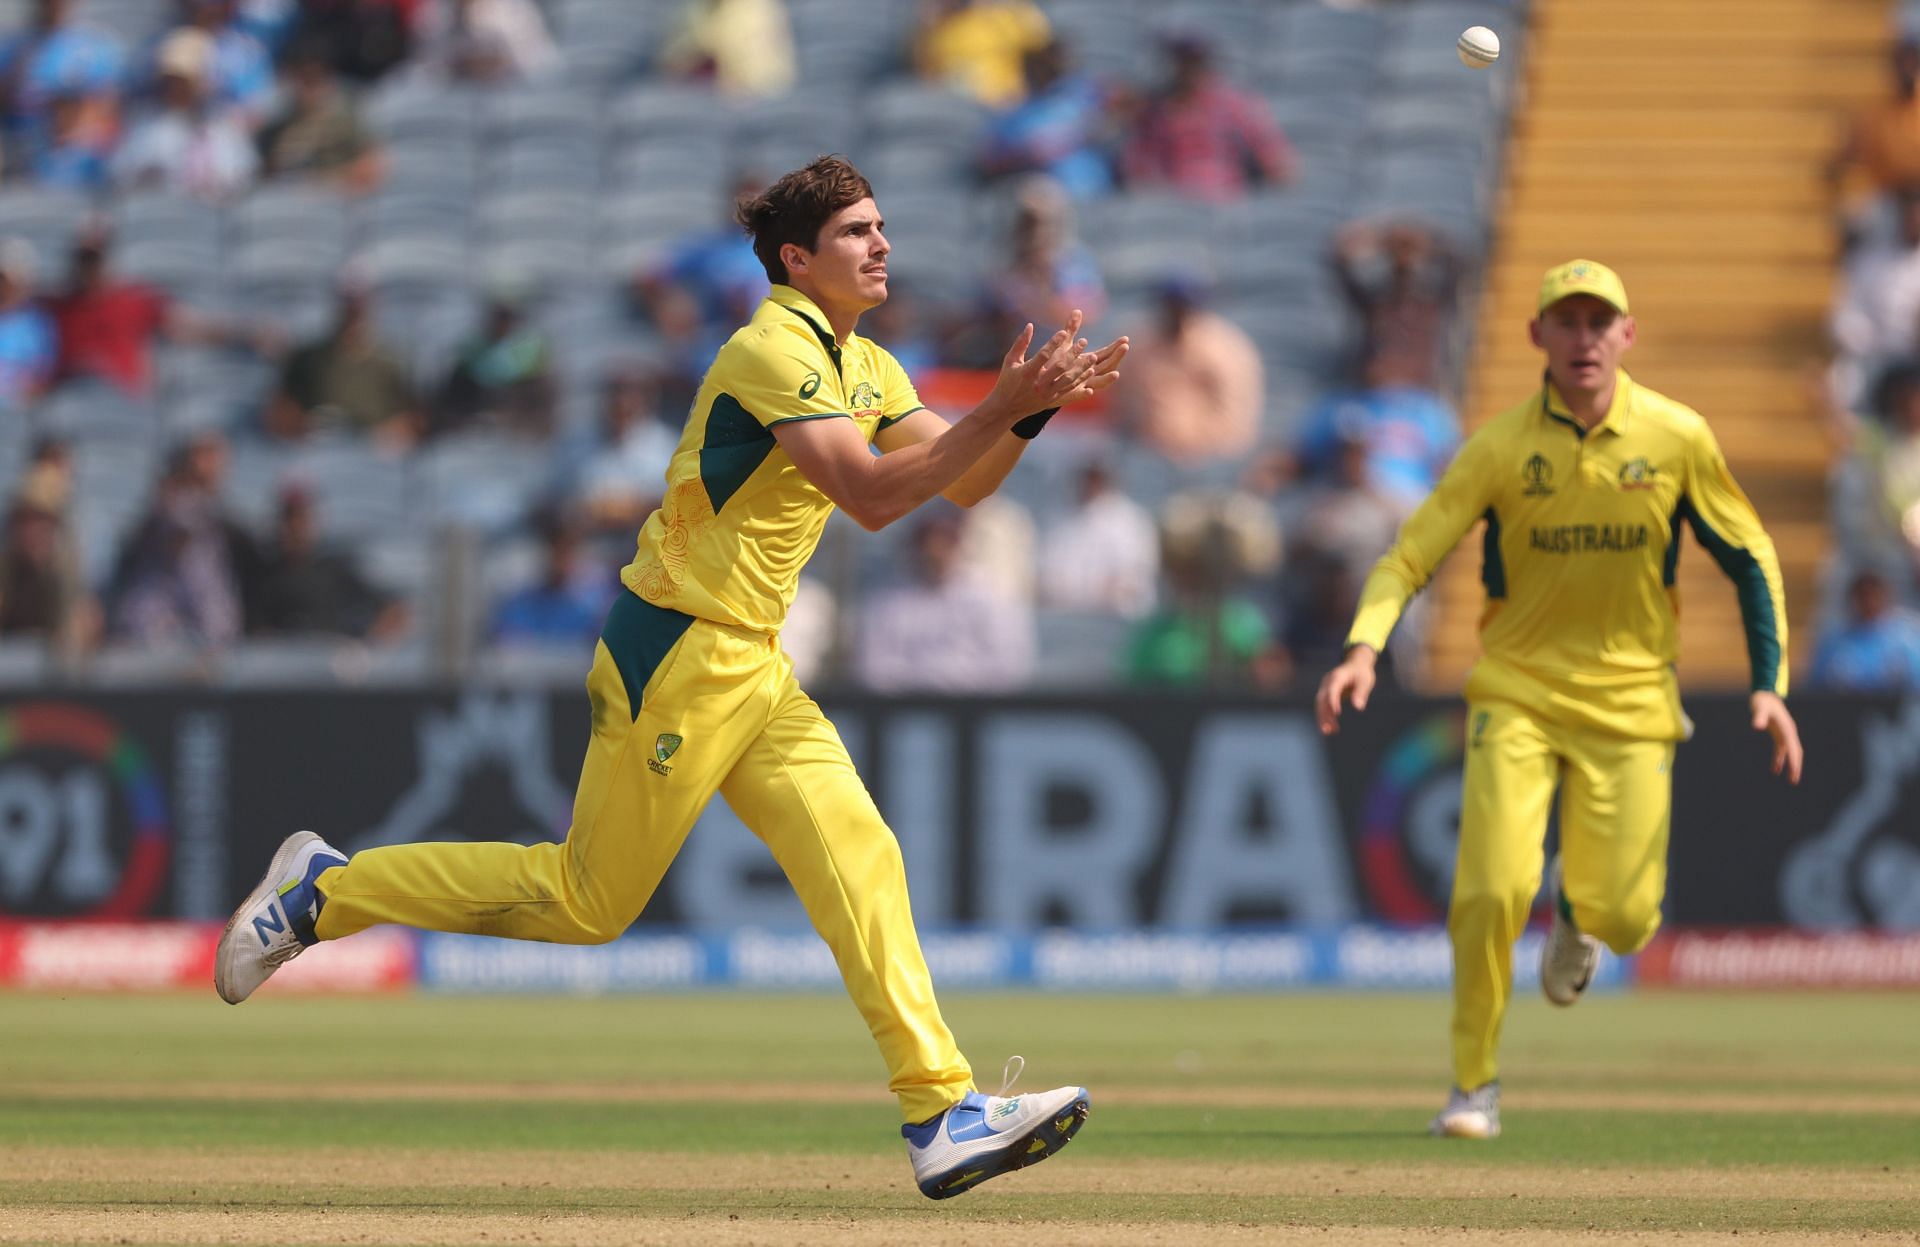 Sean Abbott is a useful all-rounder